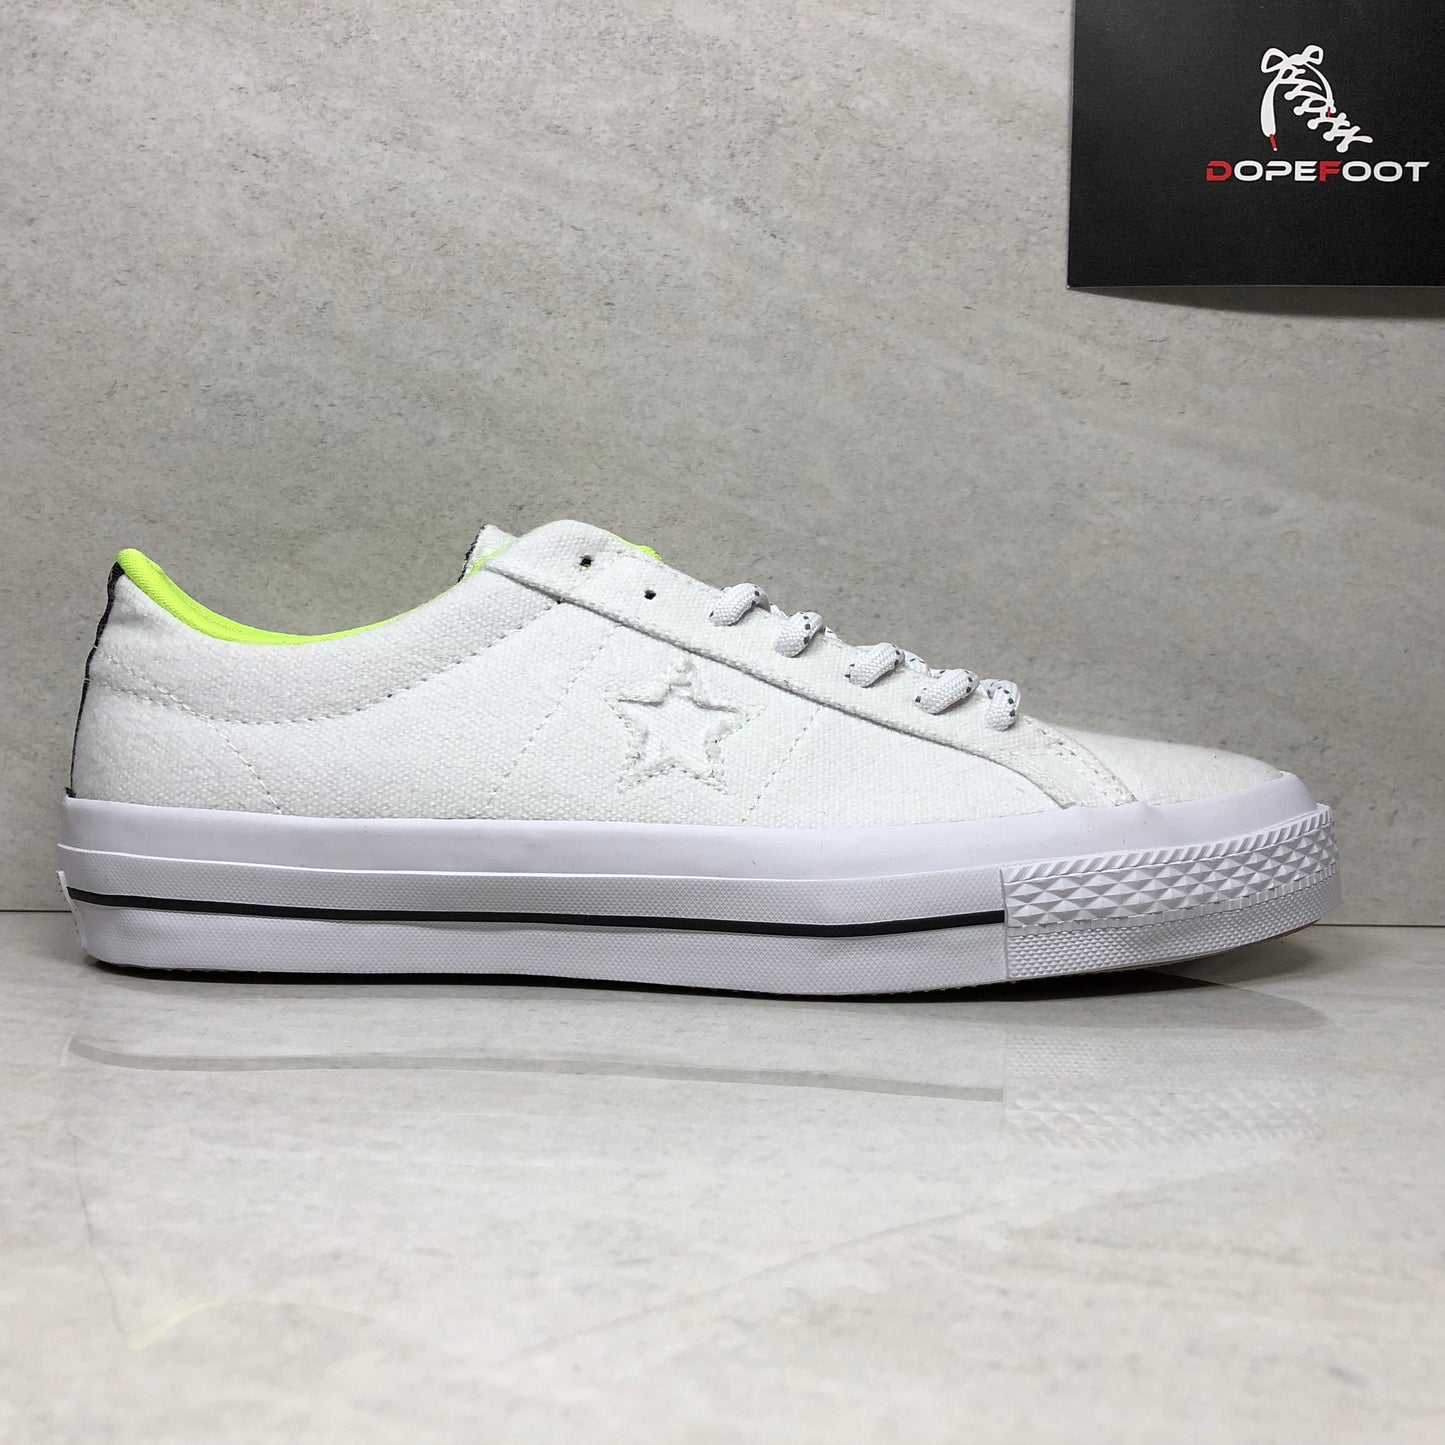 Converse One Star Shield Canvas Blanc/Volt 153704C Homme Taille 9/Taille 11,5